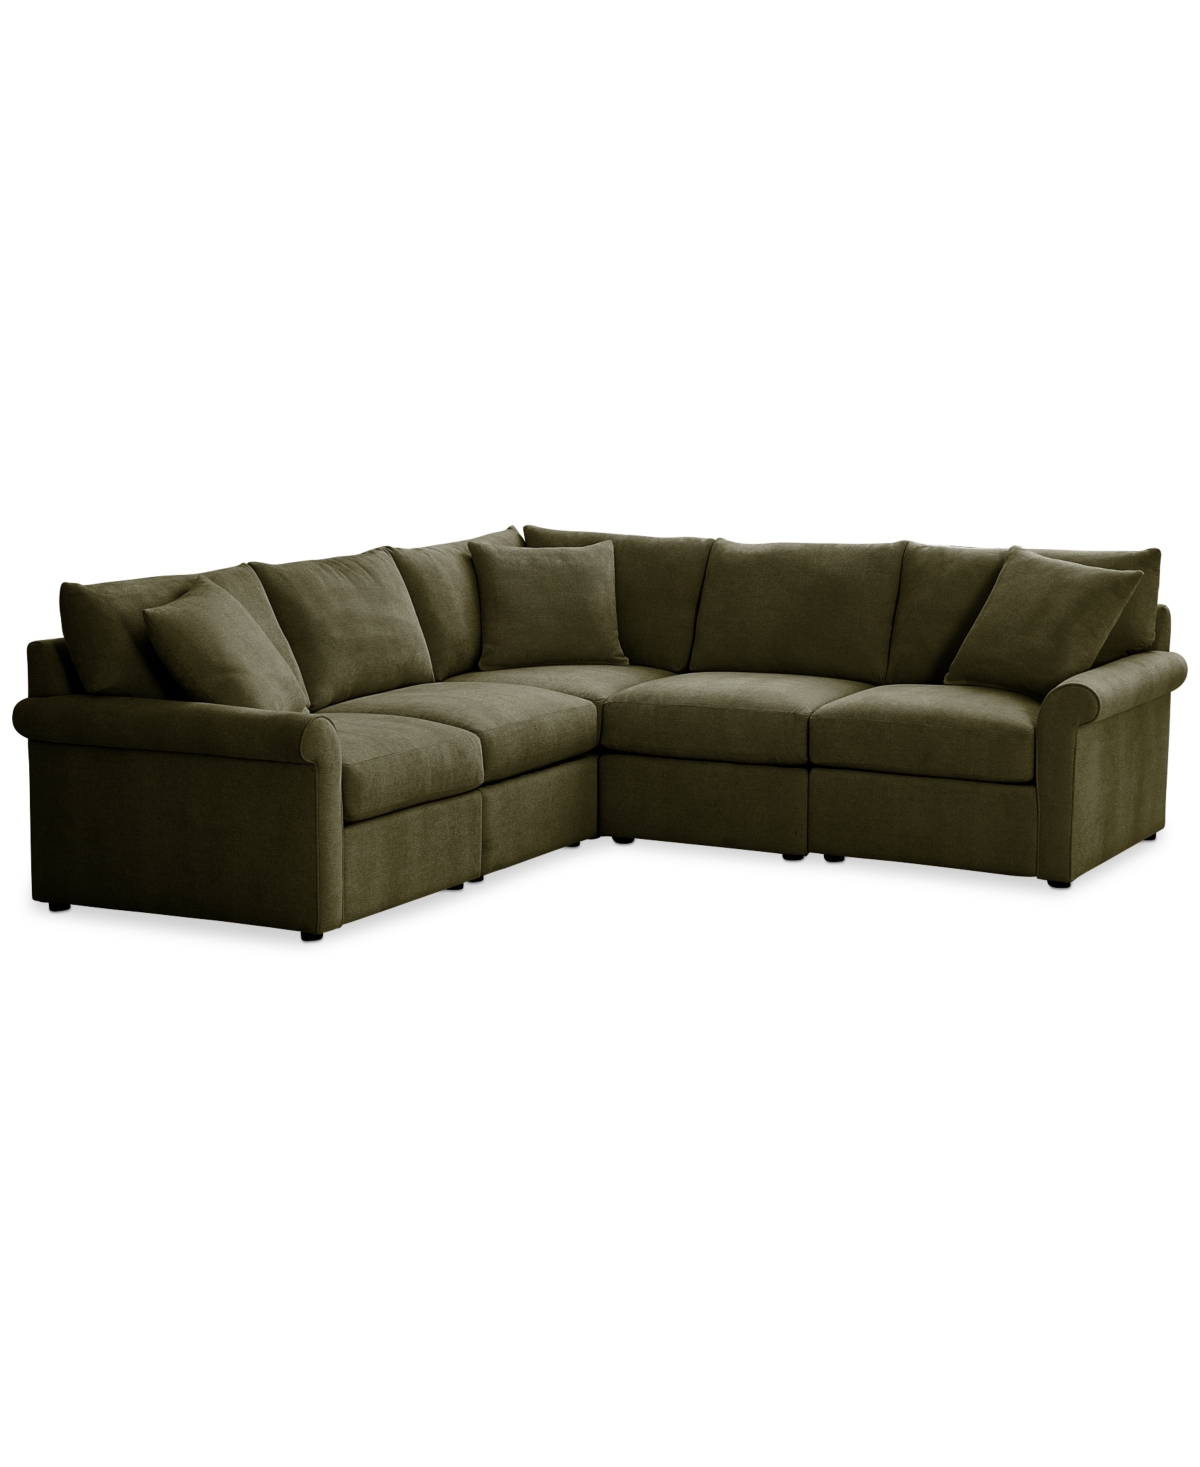 Furniture Wrenley 102" 5-pc. L-shape Modular Sectional Sofa, Created For Macy's In Olive